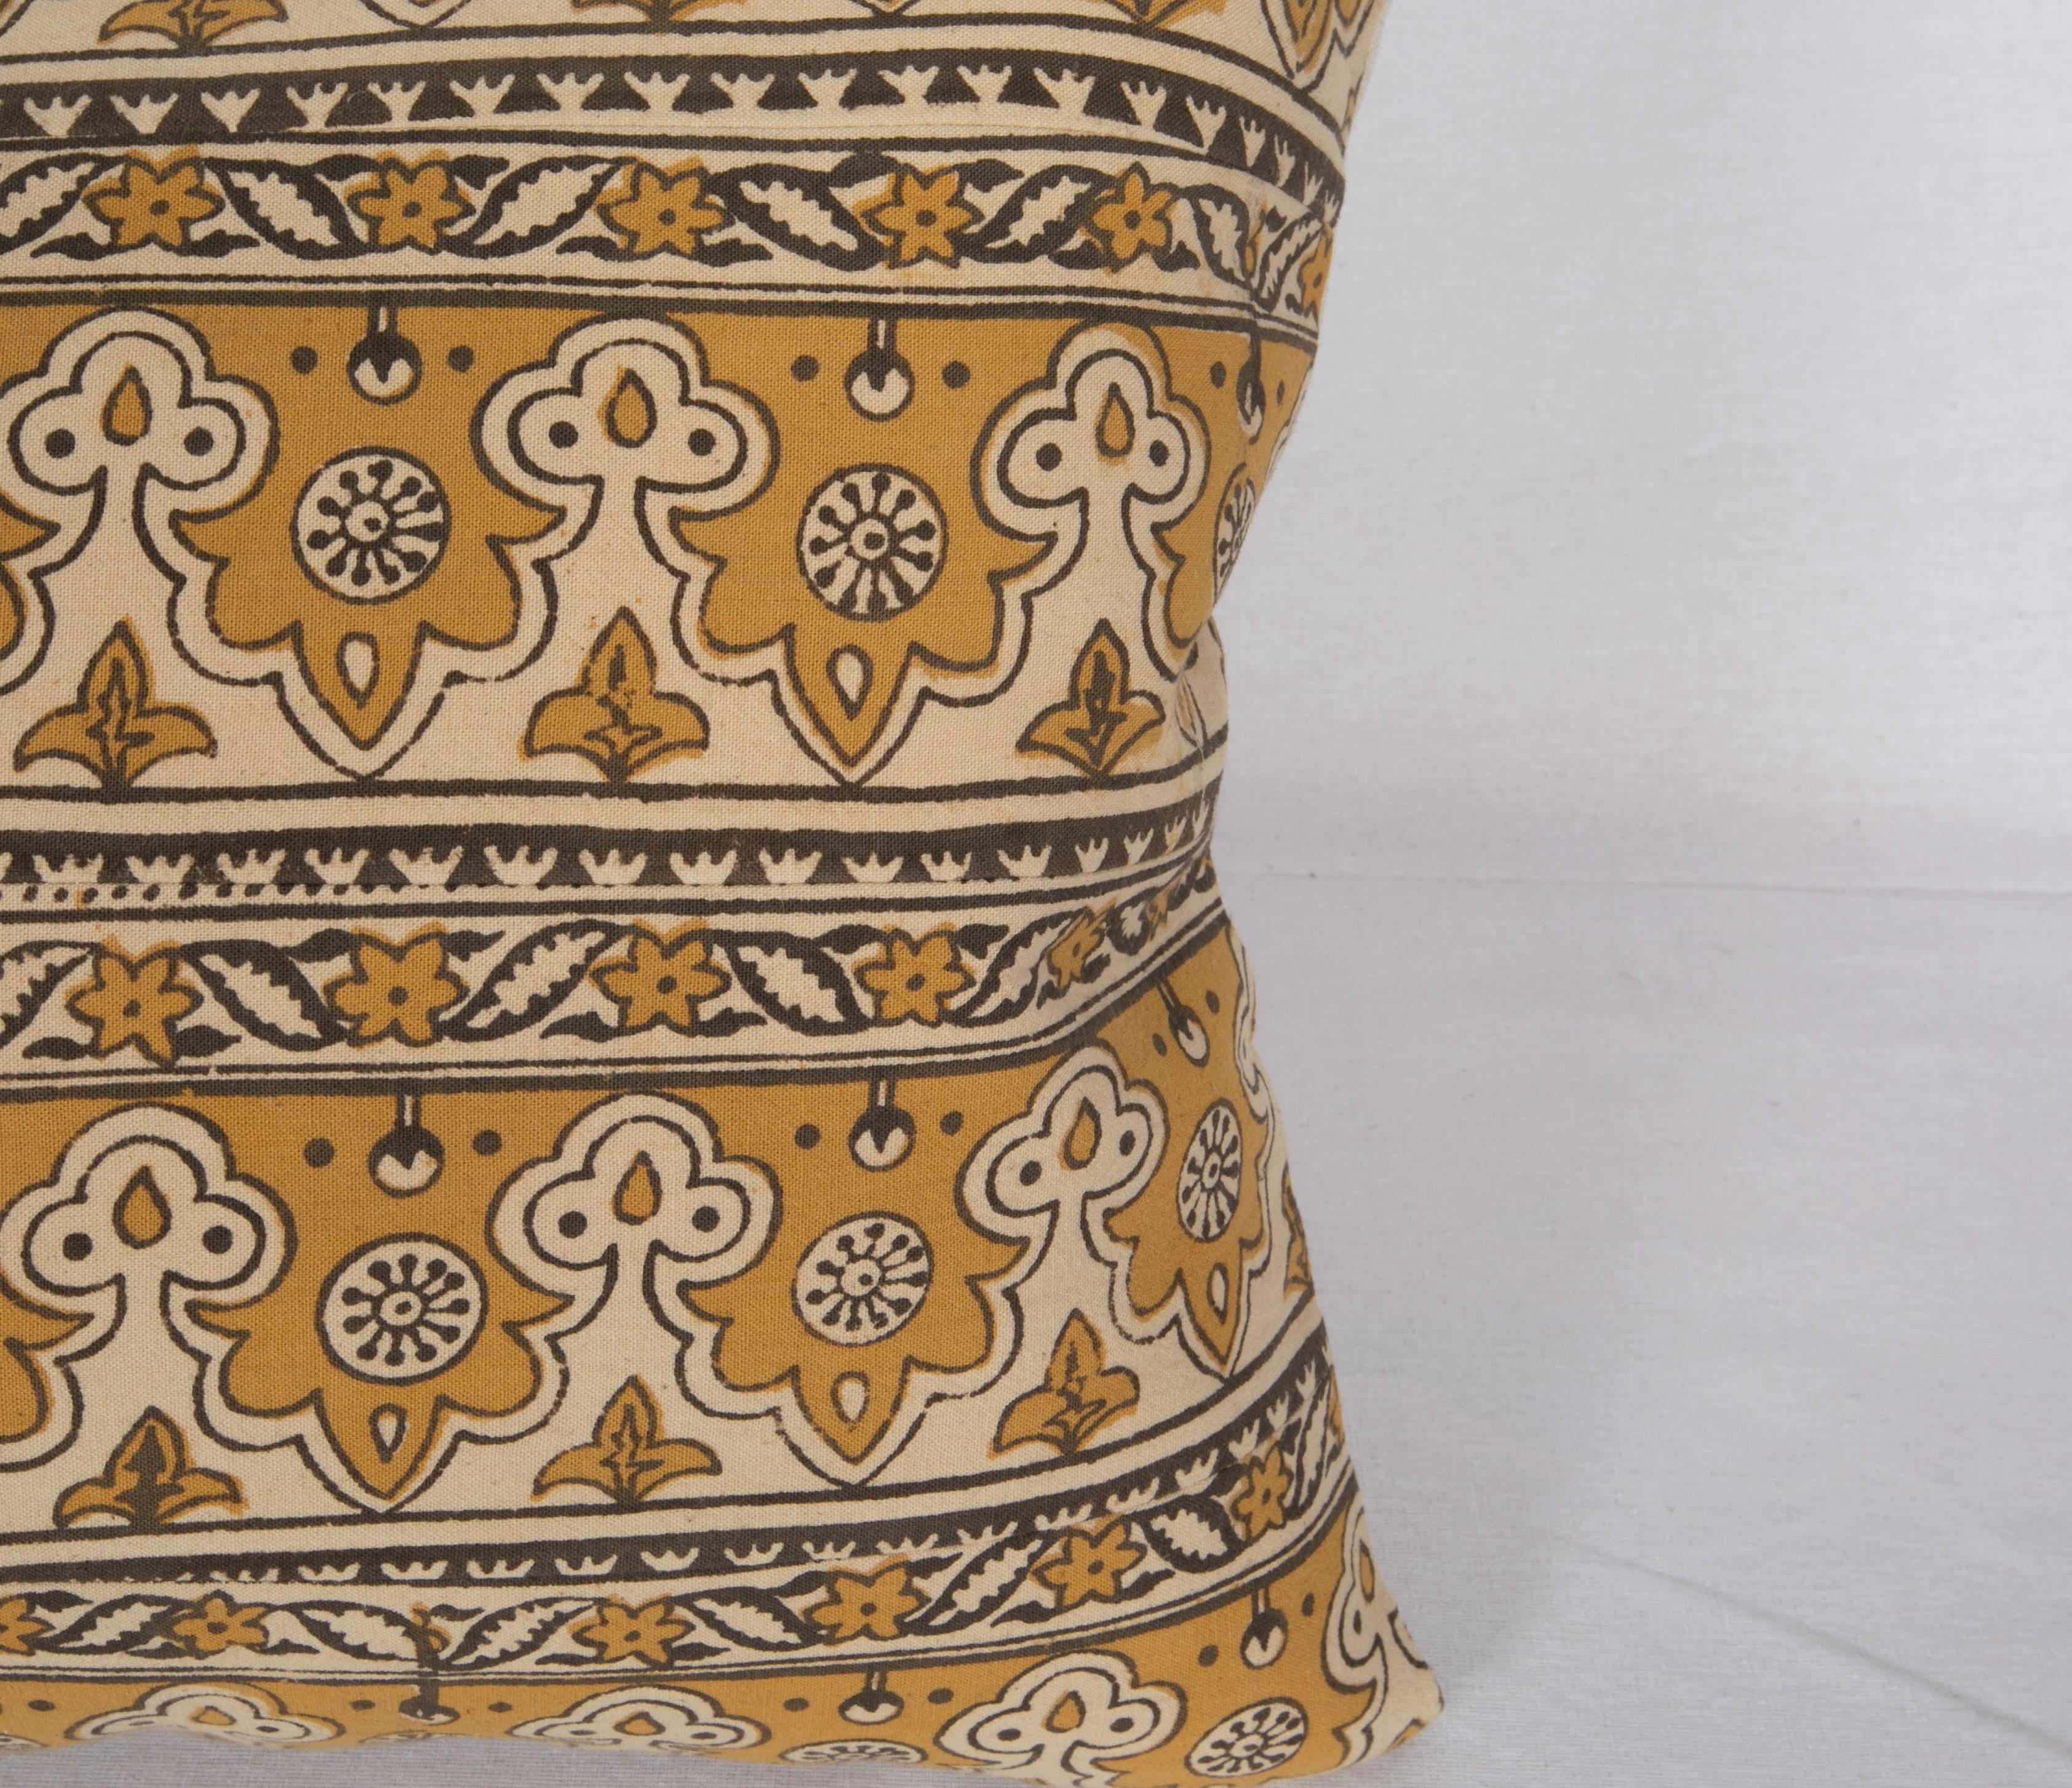 Pillow Case Made from an Uzbek Block Print, Early 20th C In Good Condition For Sale In Istanbul, TR